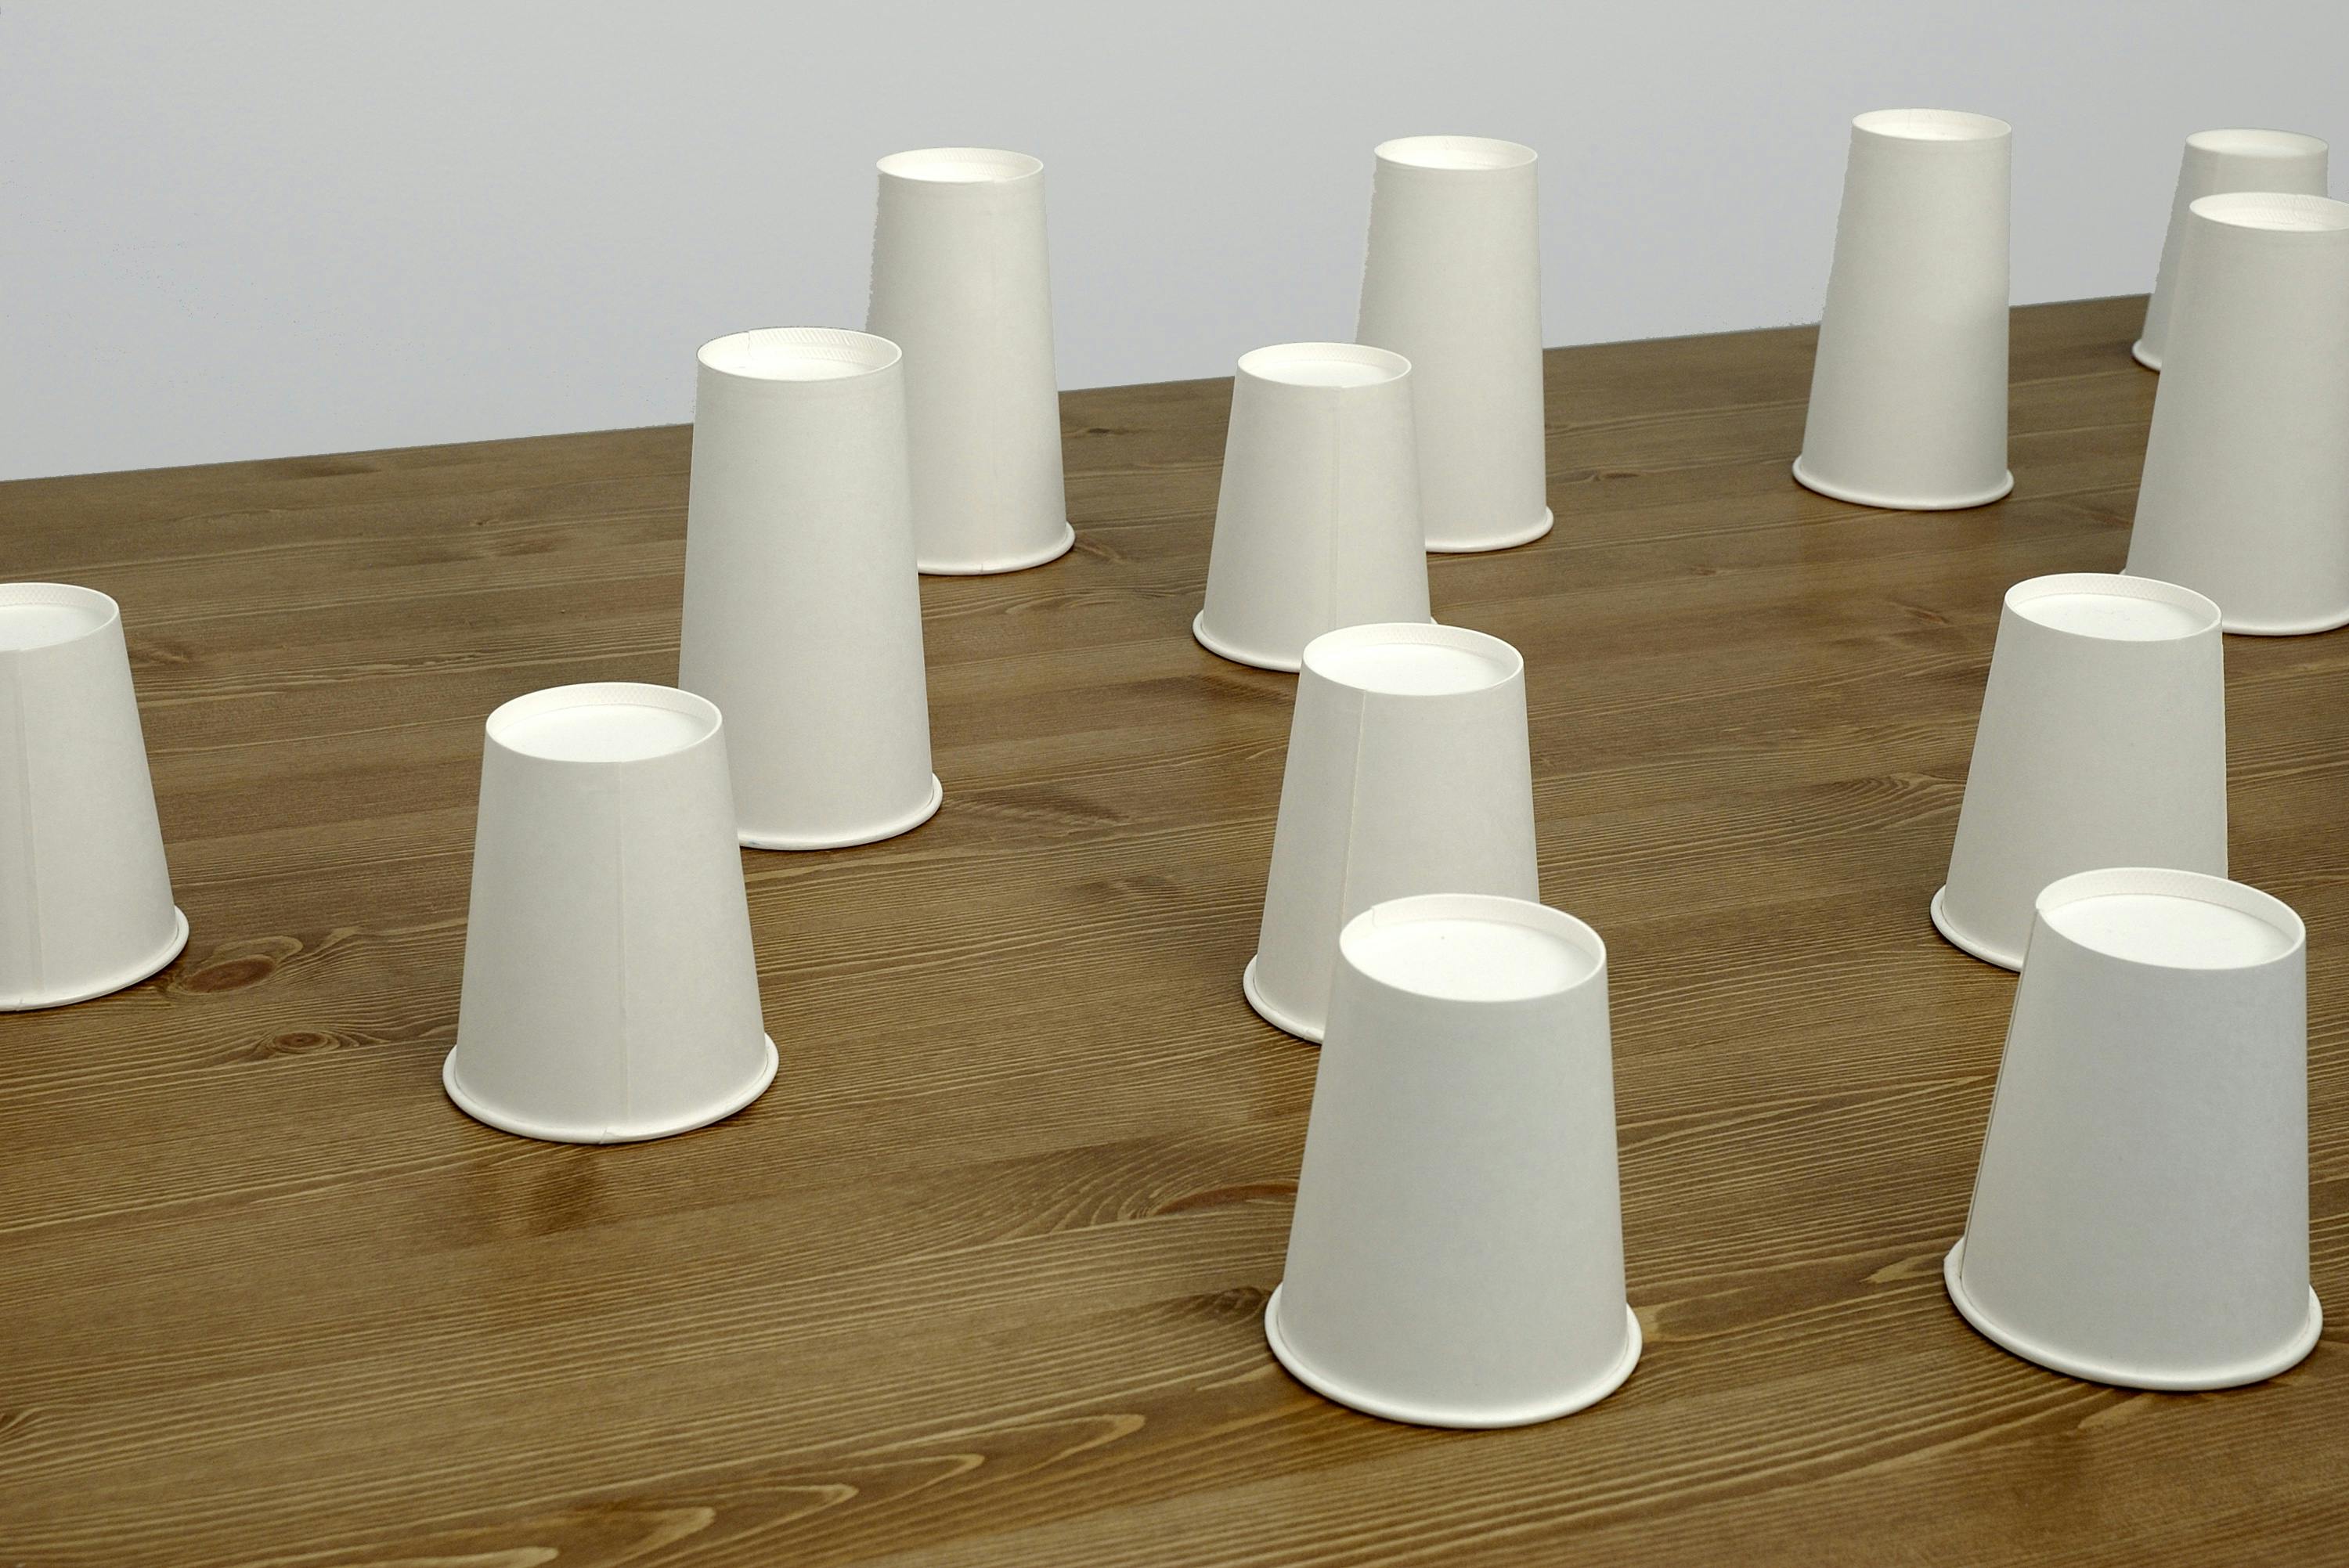 Rows of upside down white paper cups are placed on a wooden table.